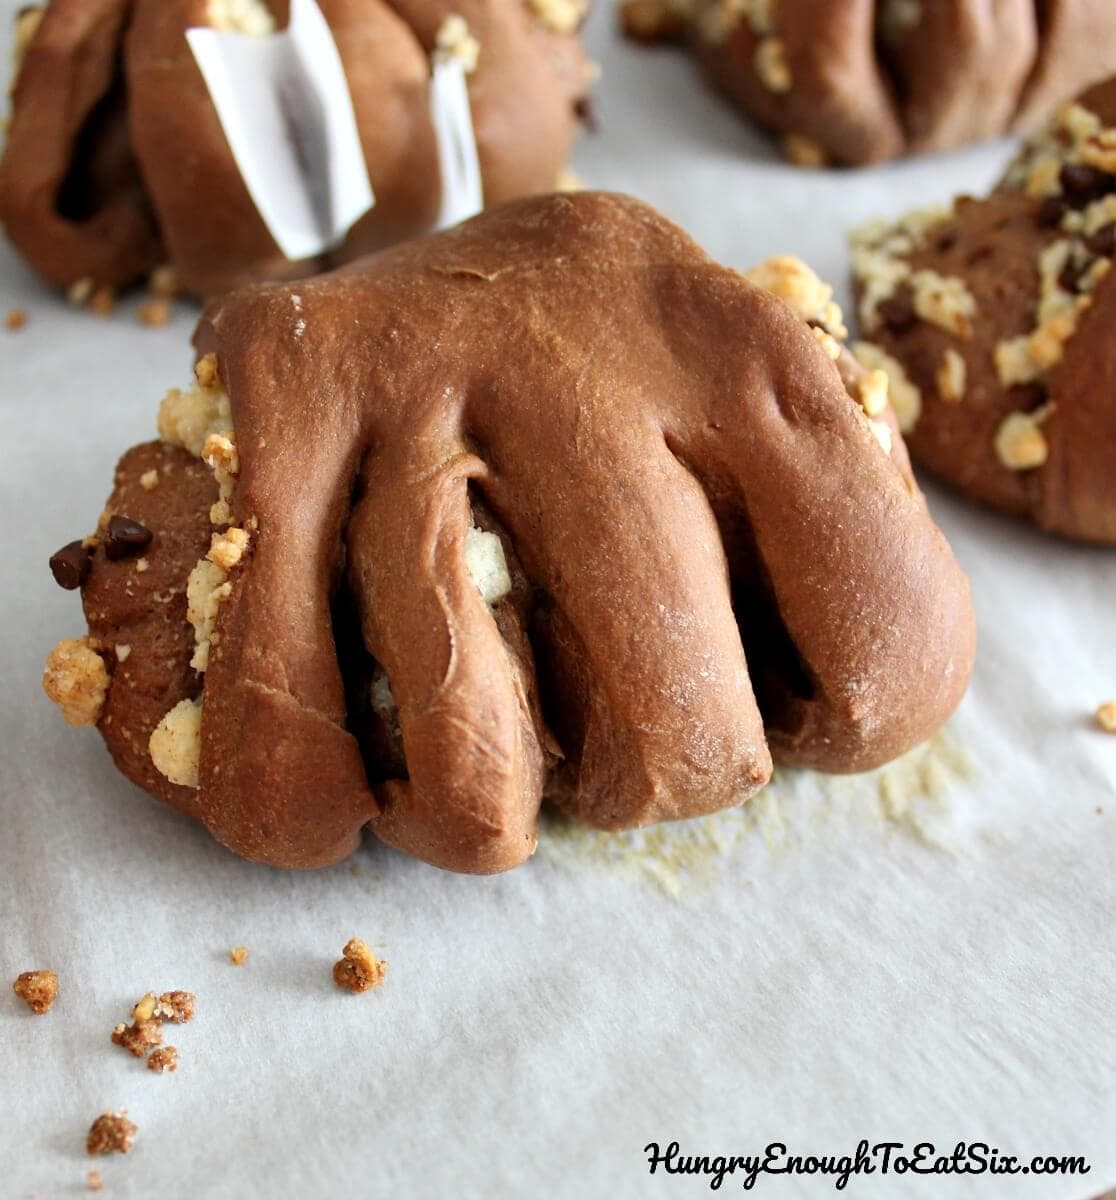 An homage to the Marvel movie 'Black Panther', these sweet chocolate rolls are filled with almond and chocolate, and decorated to look like black panther claws!